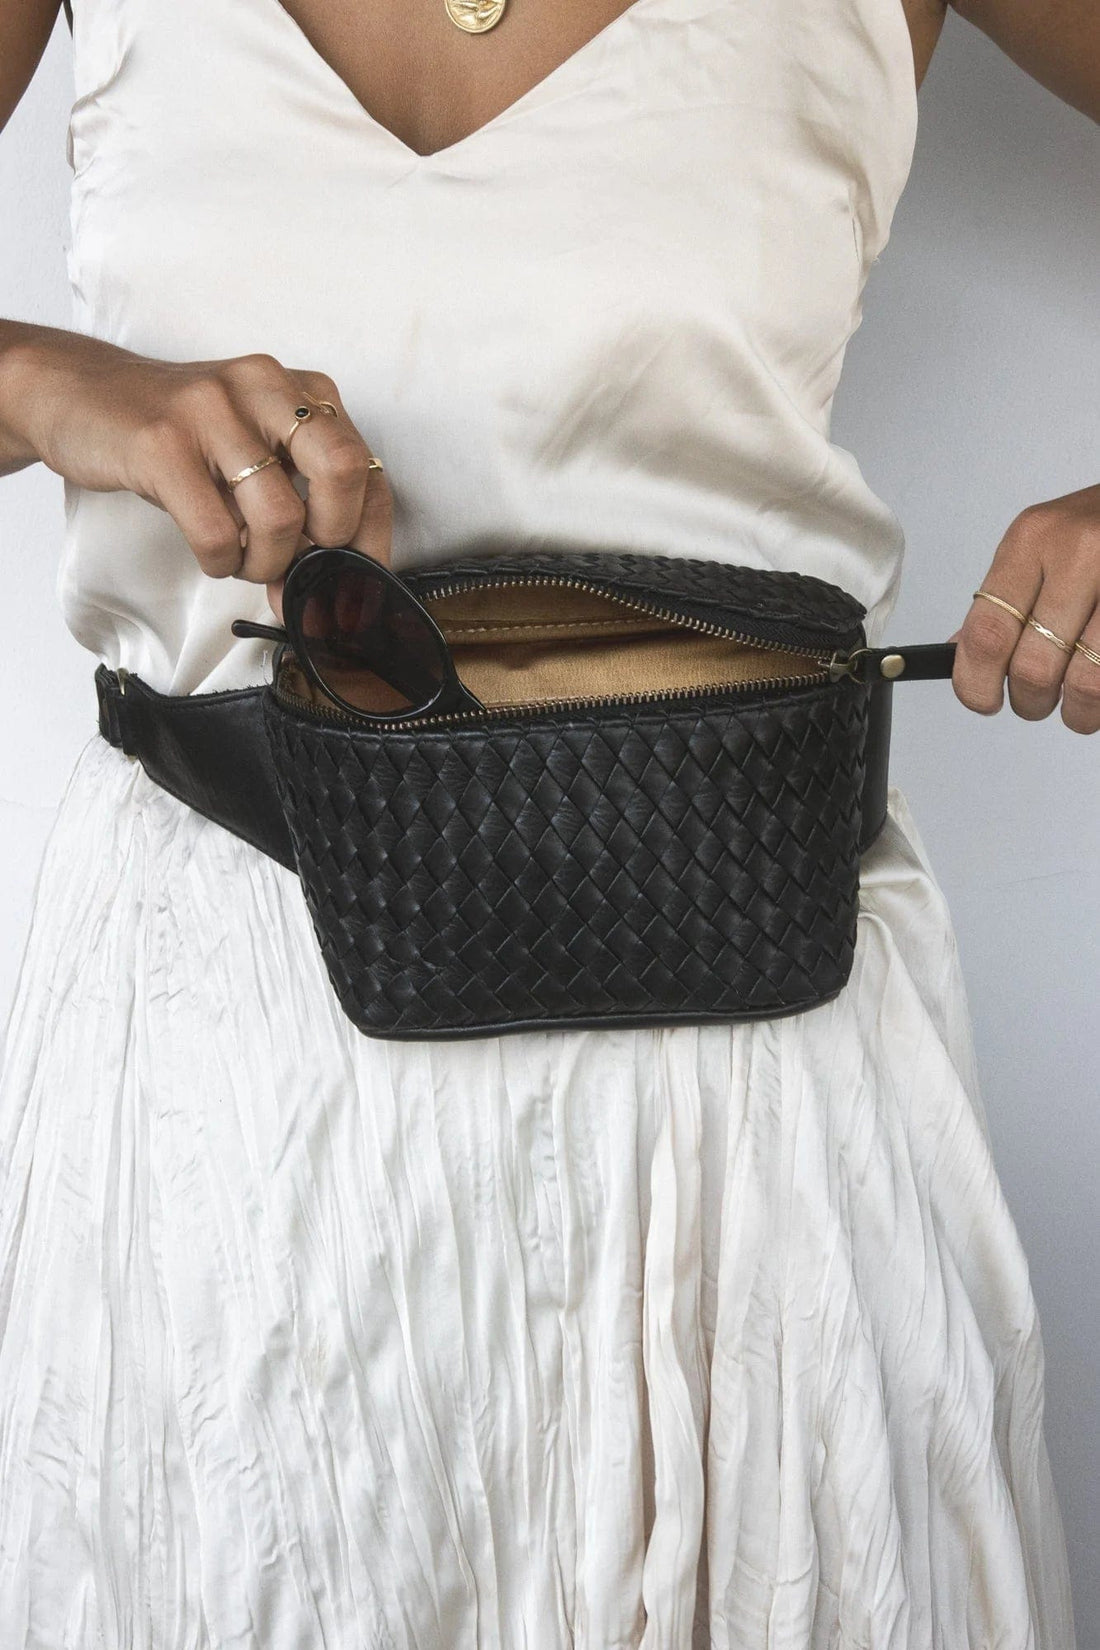 Mandrn Remy Woven - Black Fanny Pack